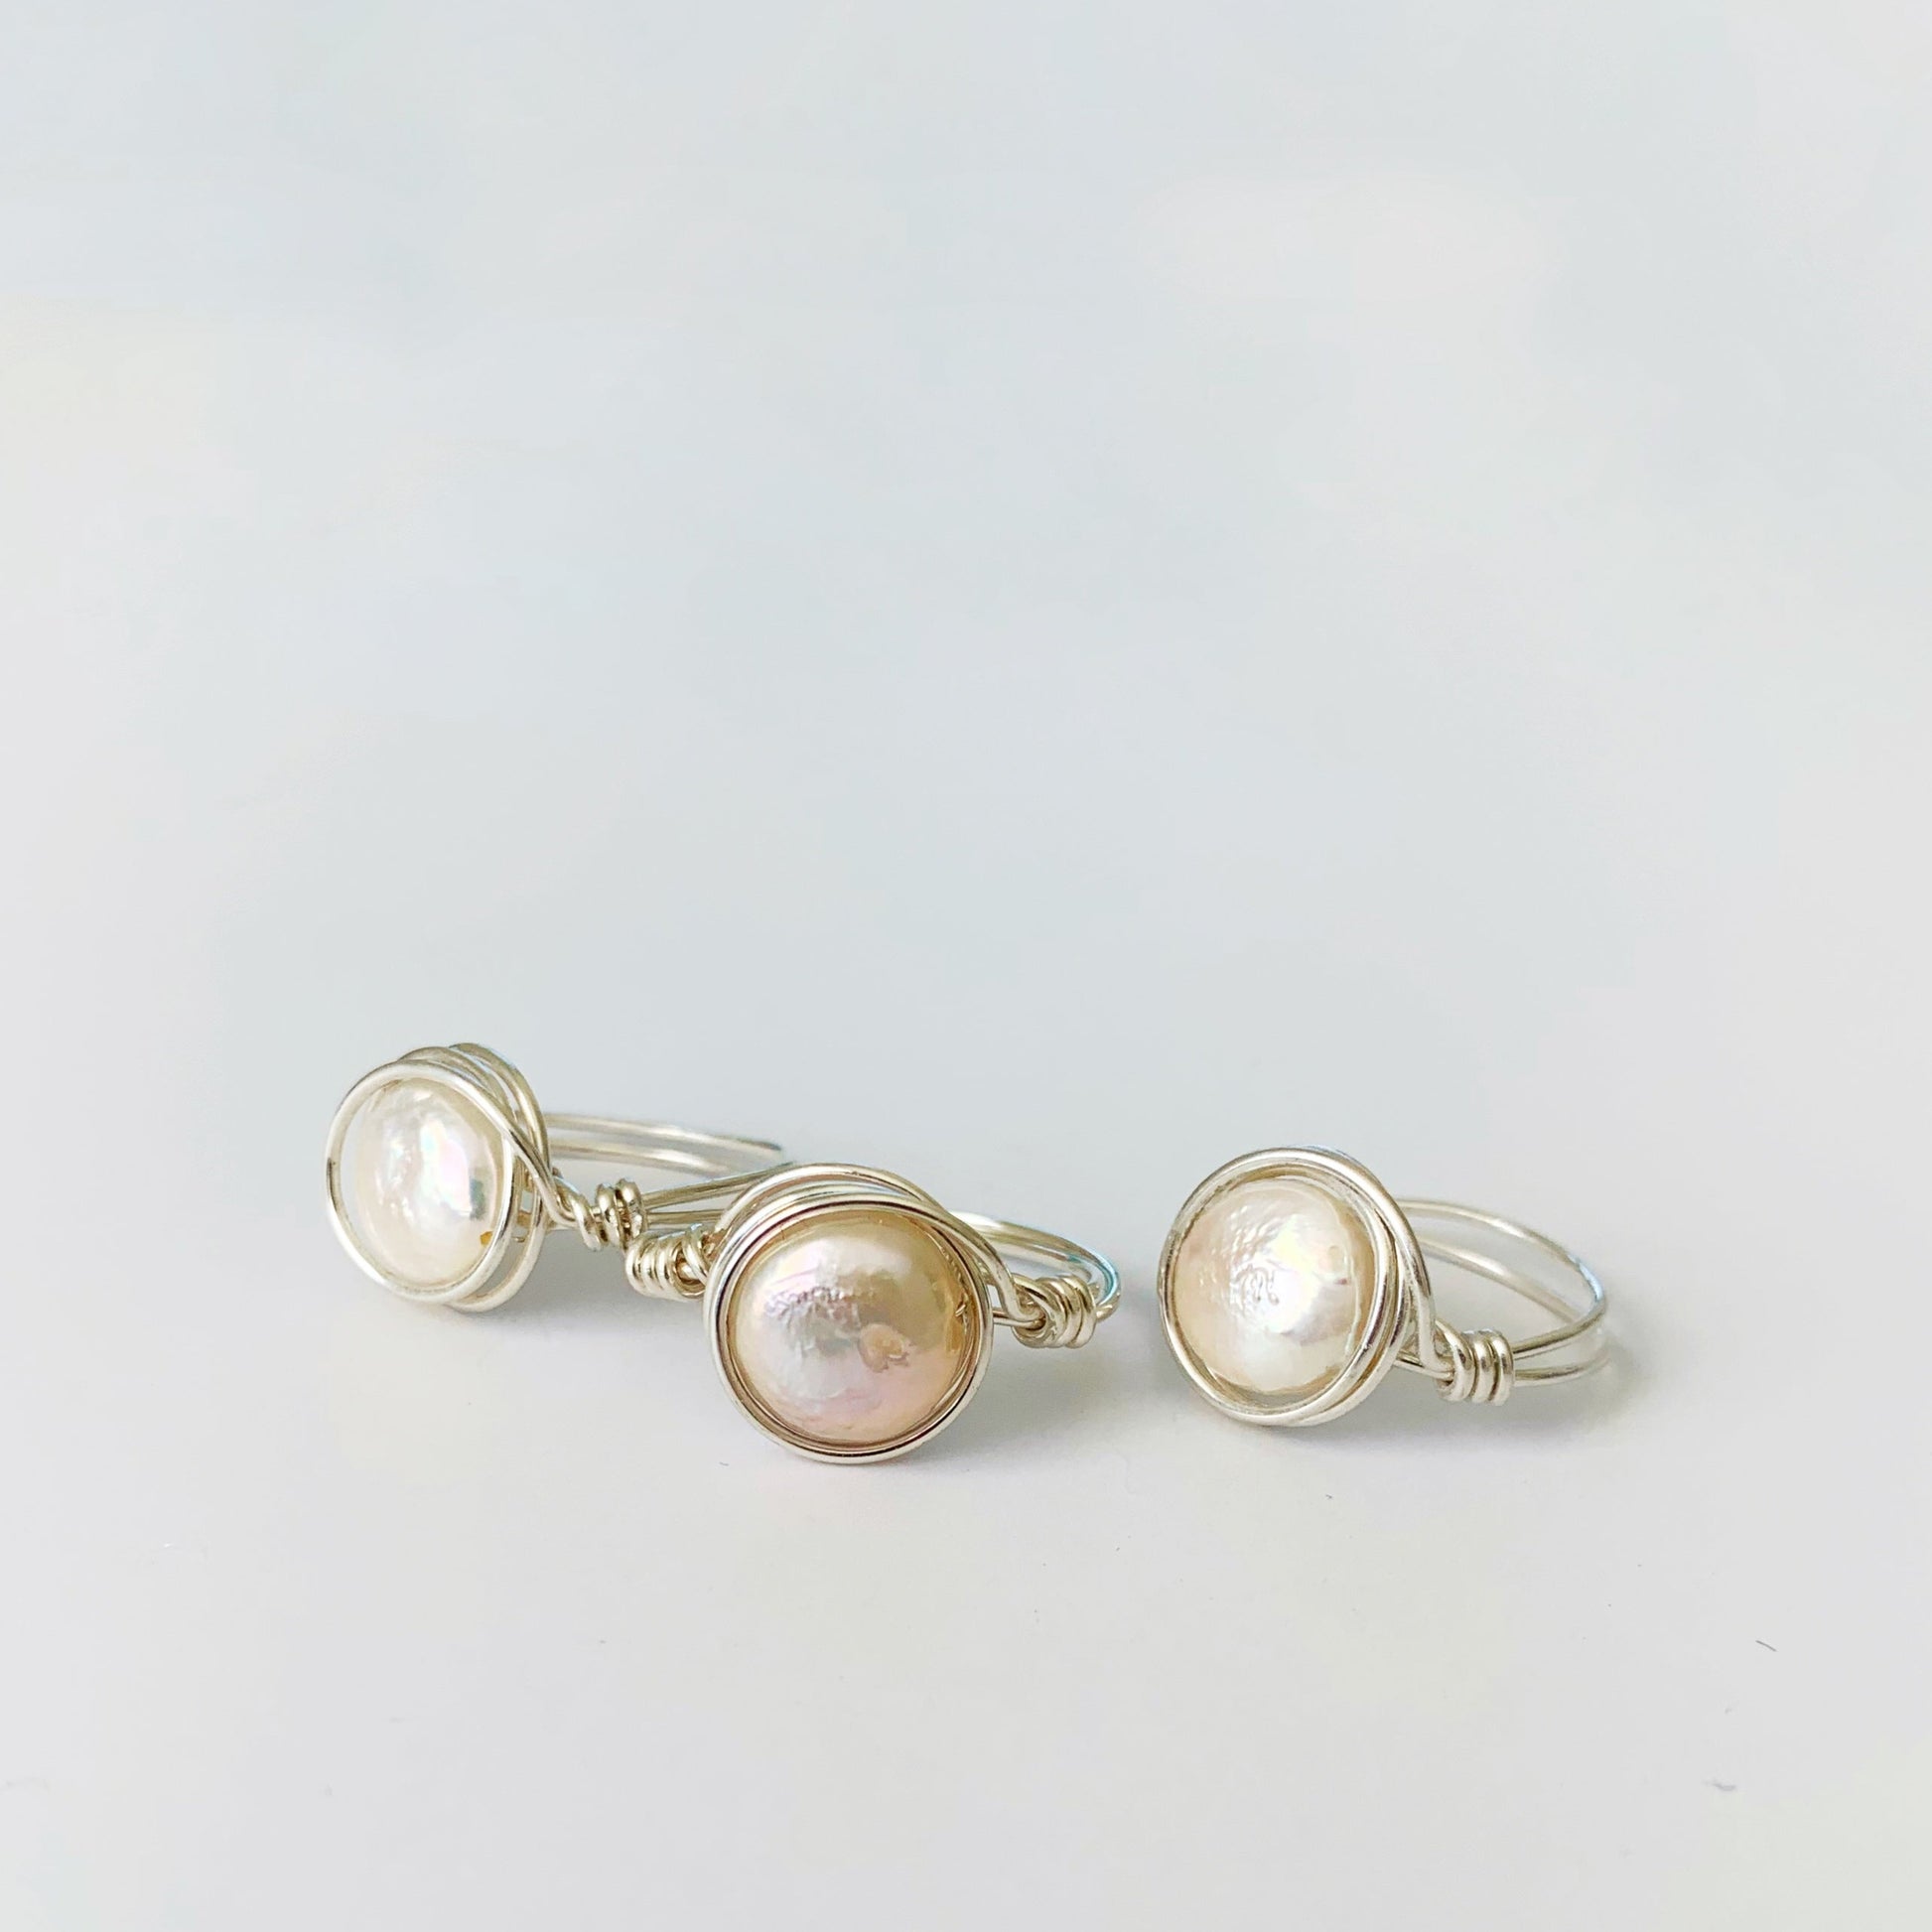 Newport Pearl wire wrapped rings in sterling silver and freshwater coin pearl. pictured here 3 rings on a white surface